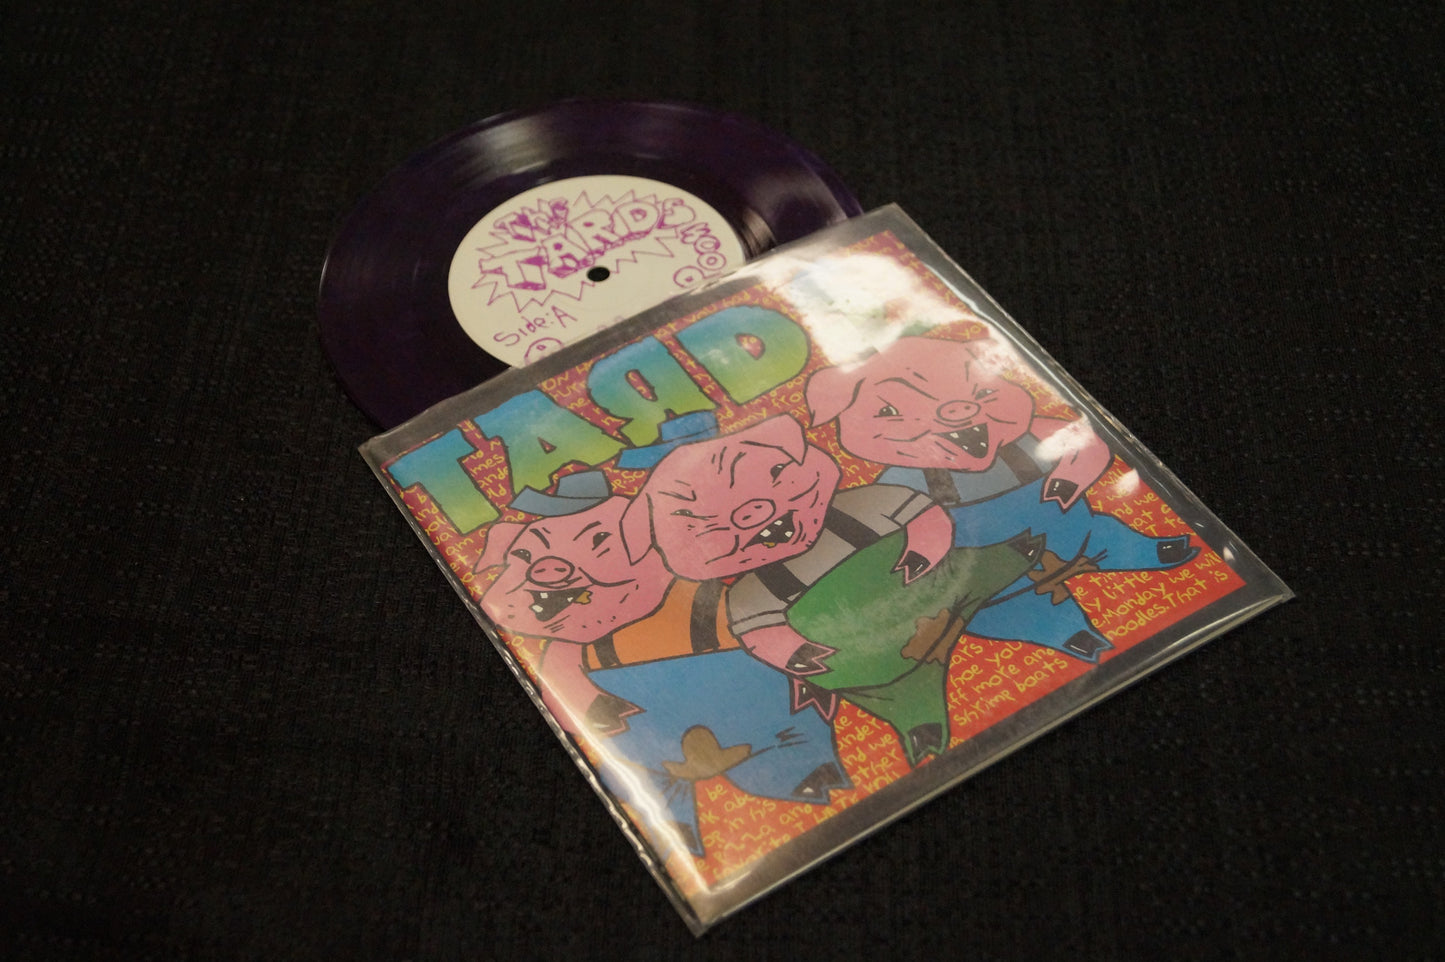 The Tards "Rubber Room" 1996 Colored Vinyl Art By Kozik